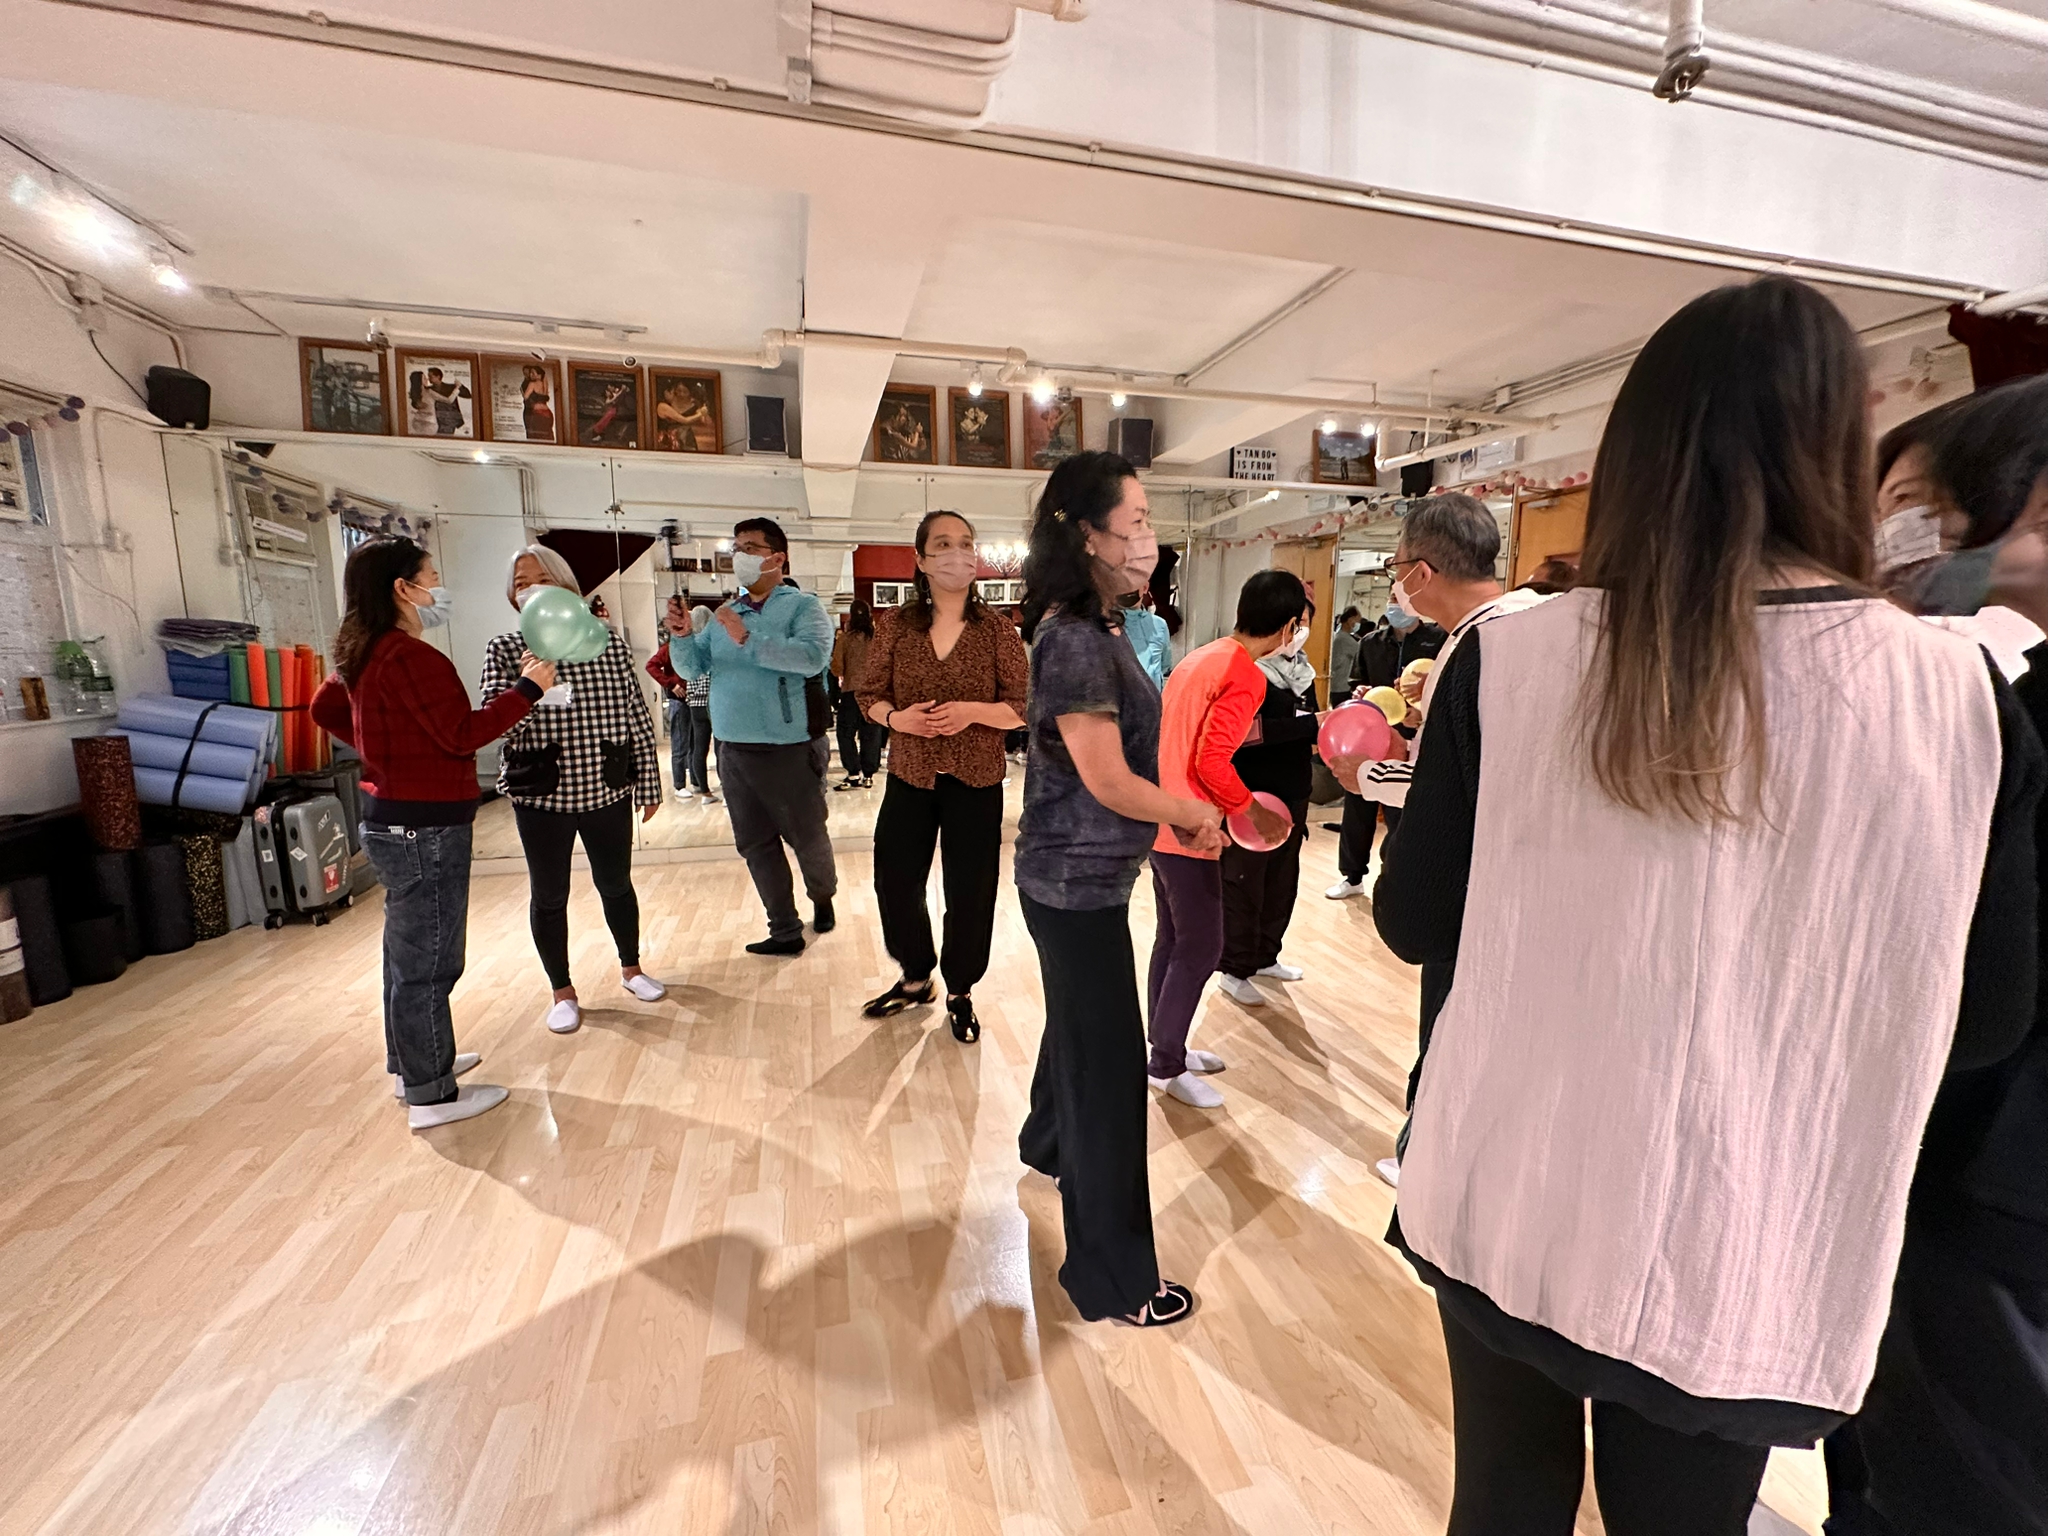 Argentine Tango Therapy helps Parkinson's patients.